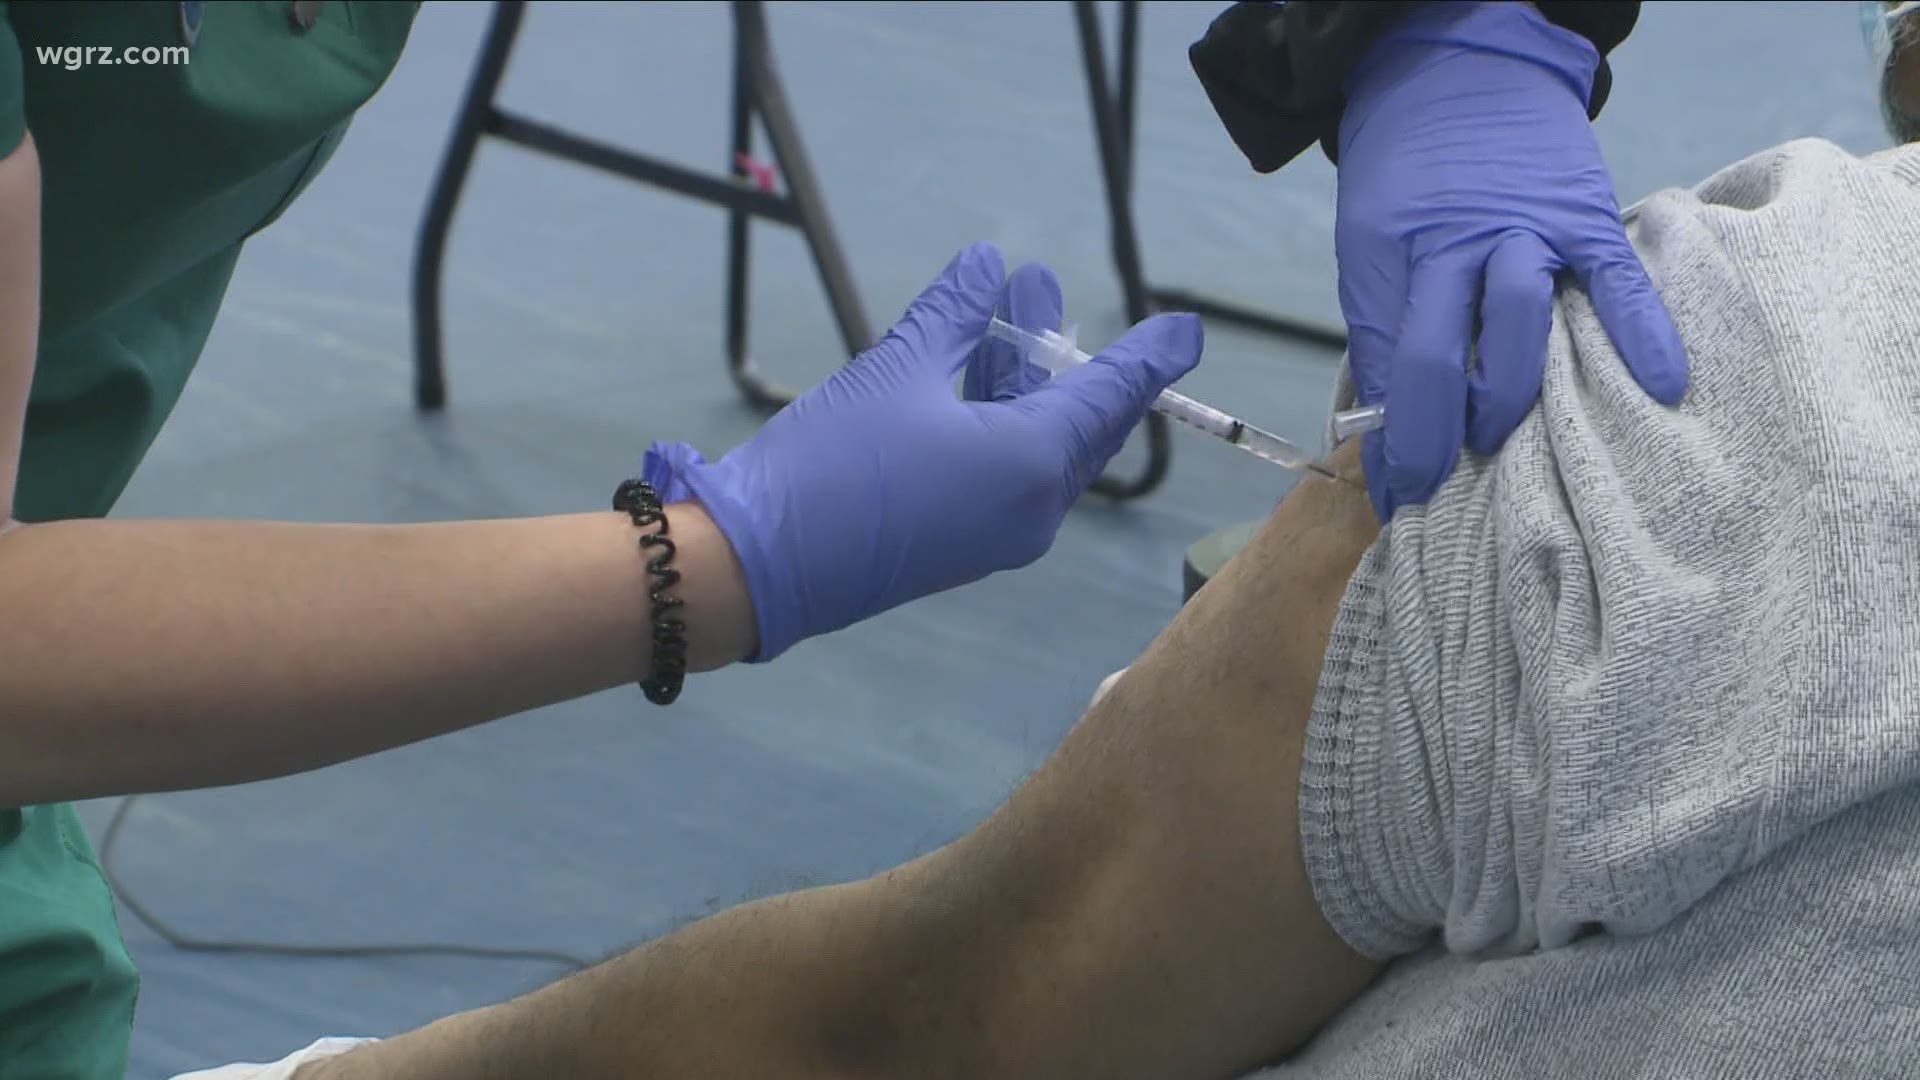 Federal EEOC says companies technically could require vaccinations